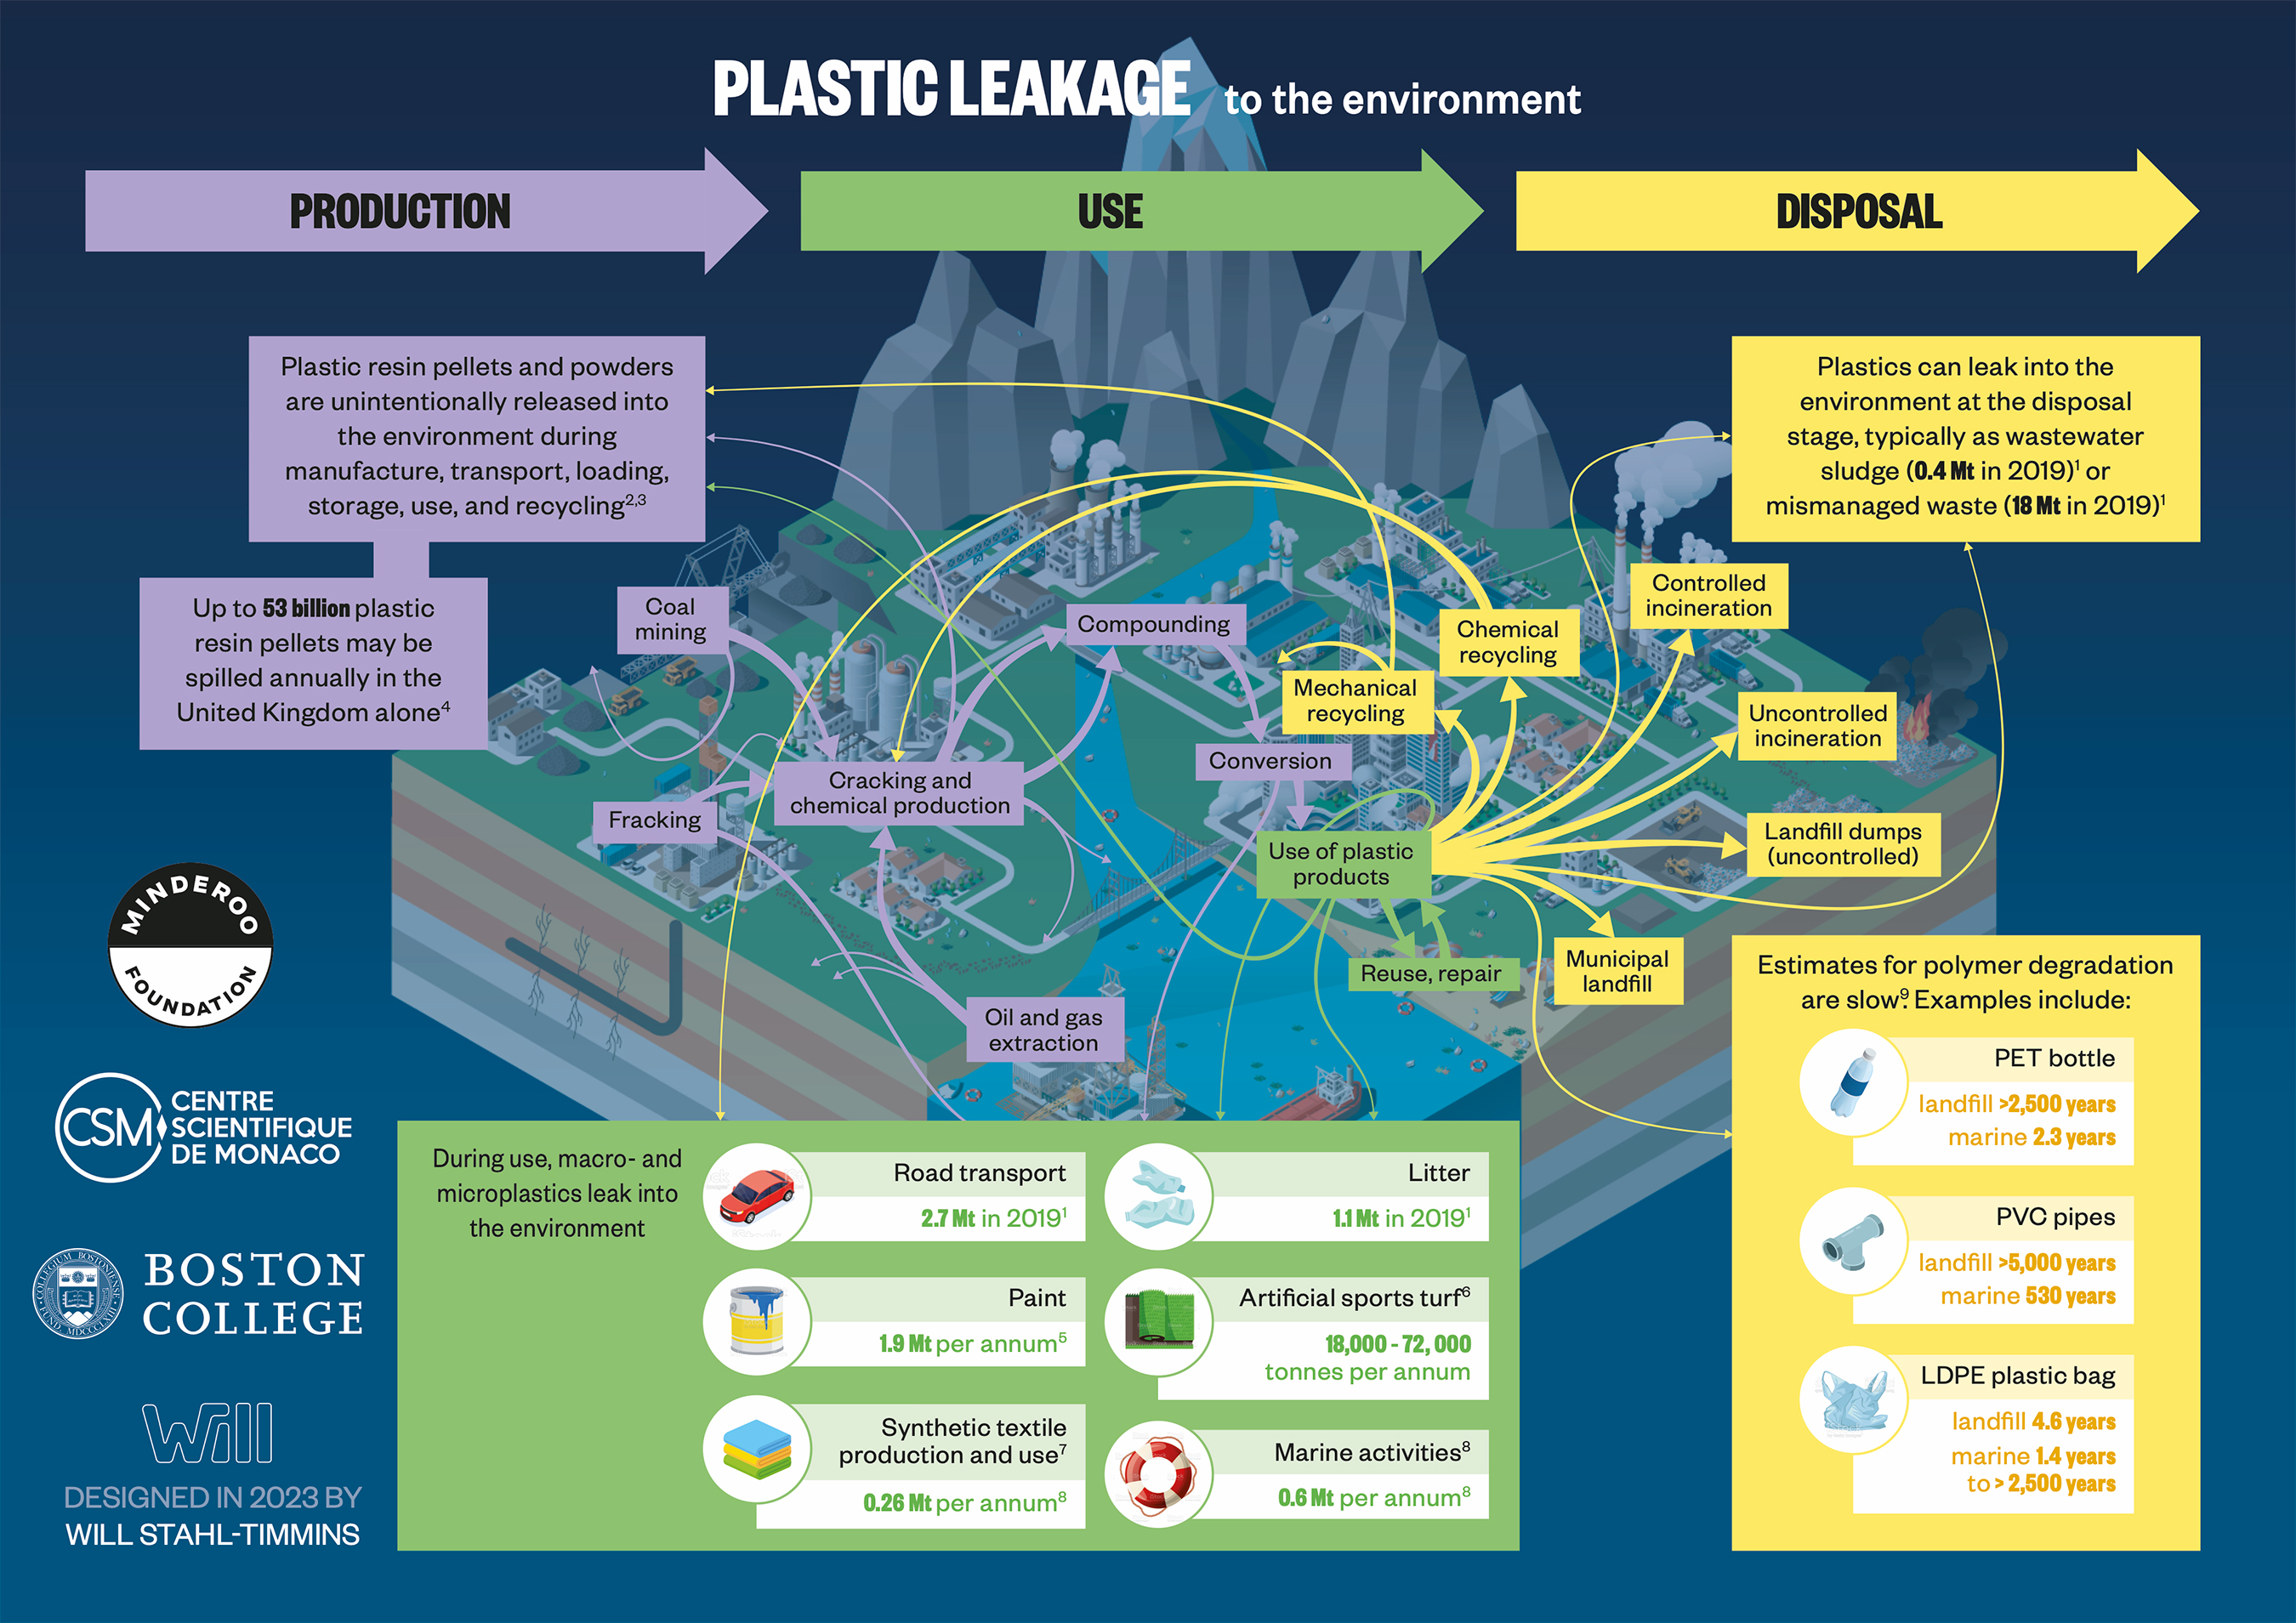 Plastic Leakage to the environment